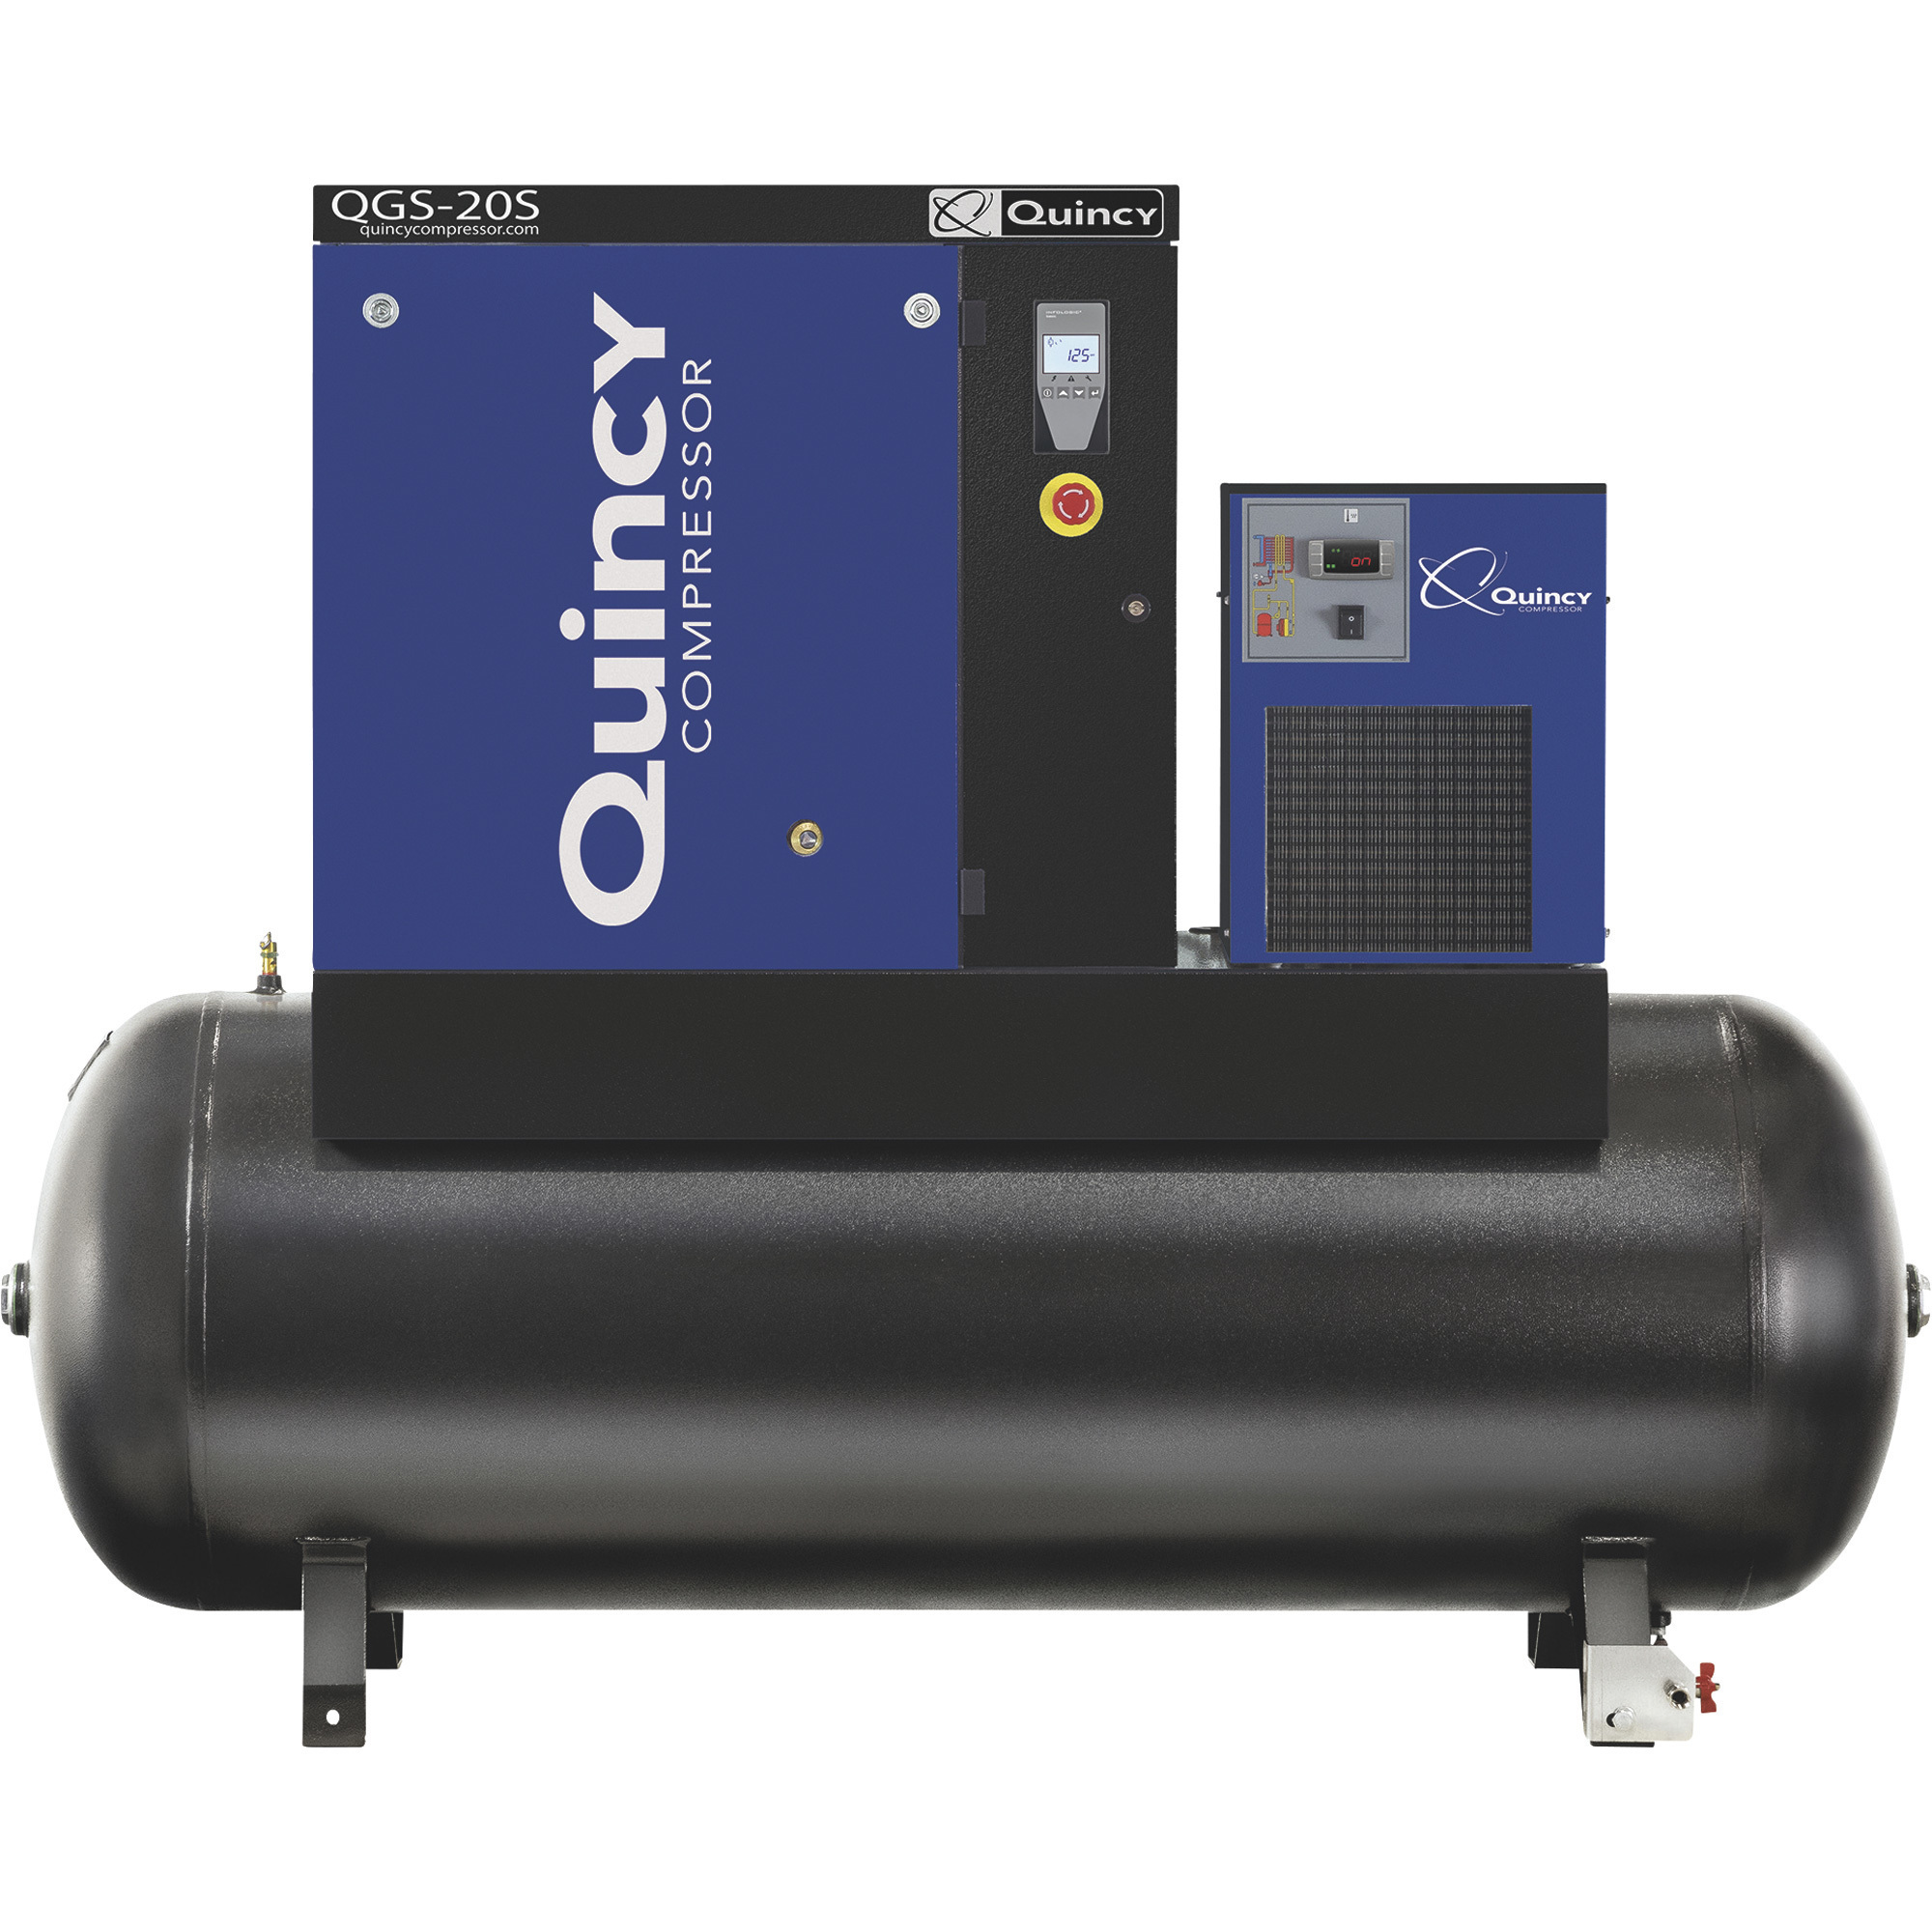 Quincy QGS Rotary Screw Air Compressor, Tank Mounted, w/ Dryer, 230V 3-Phase, 20 HP, 132 Gallon, 60.8 CFM, Model 4152022000